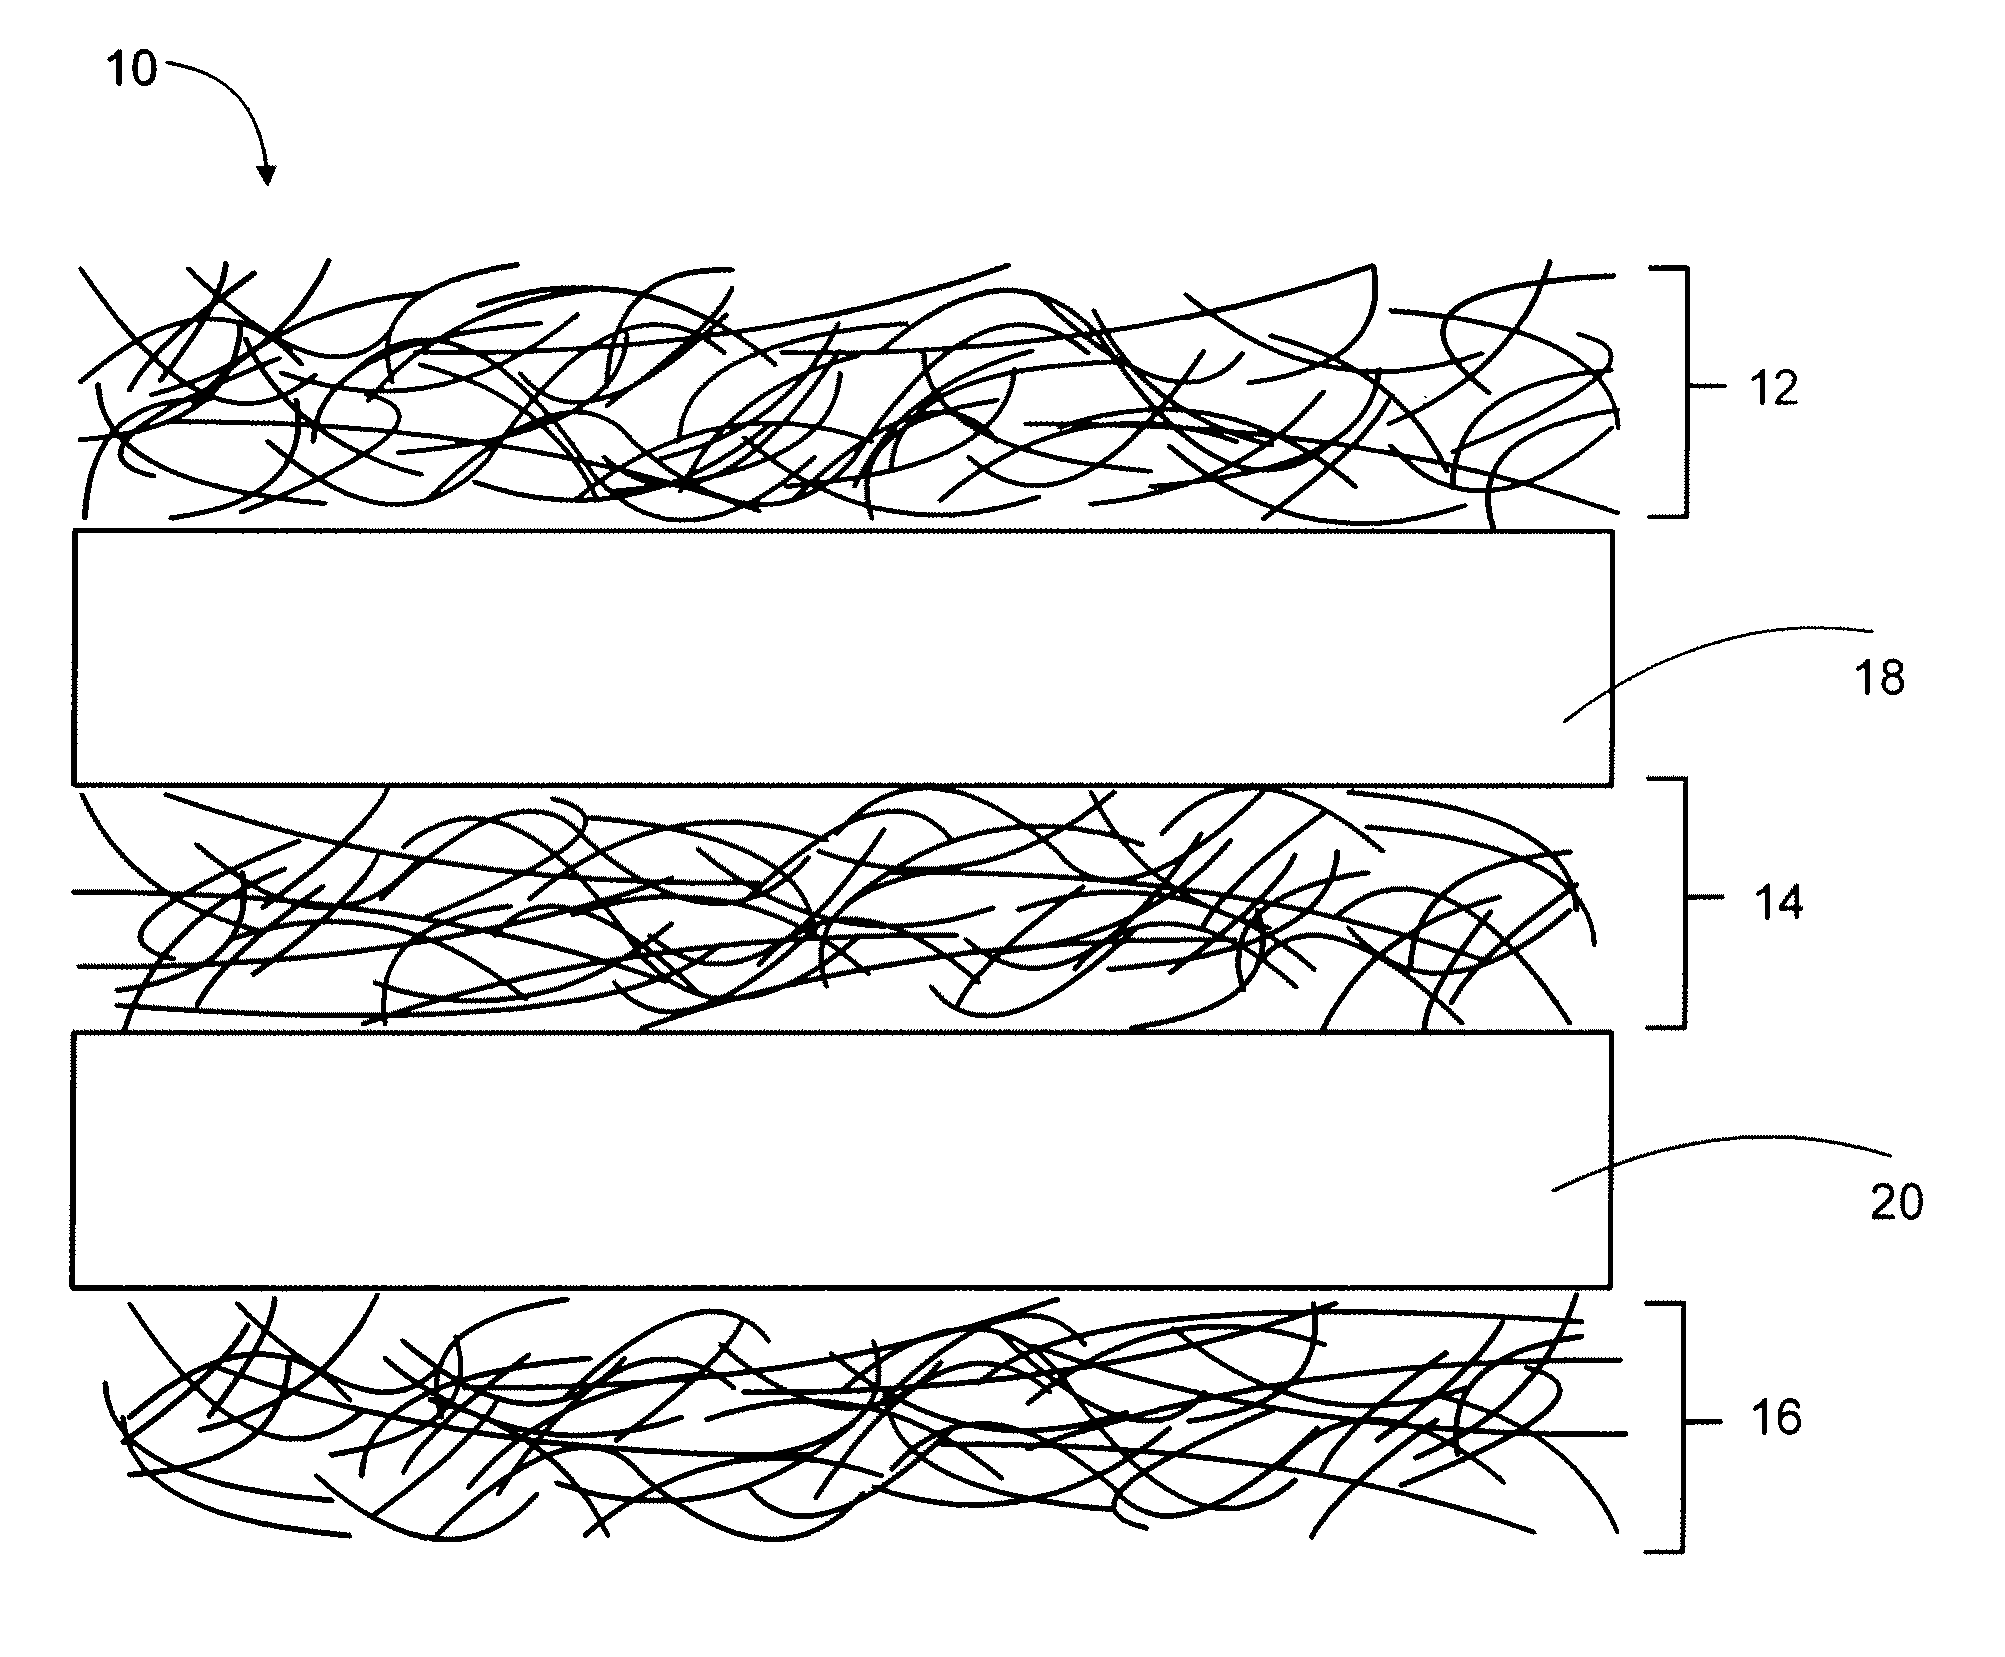 Electromagnetic interference shielding structure including carbon nanotube or nanofiber films and methods